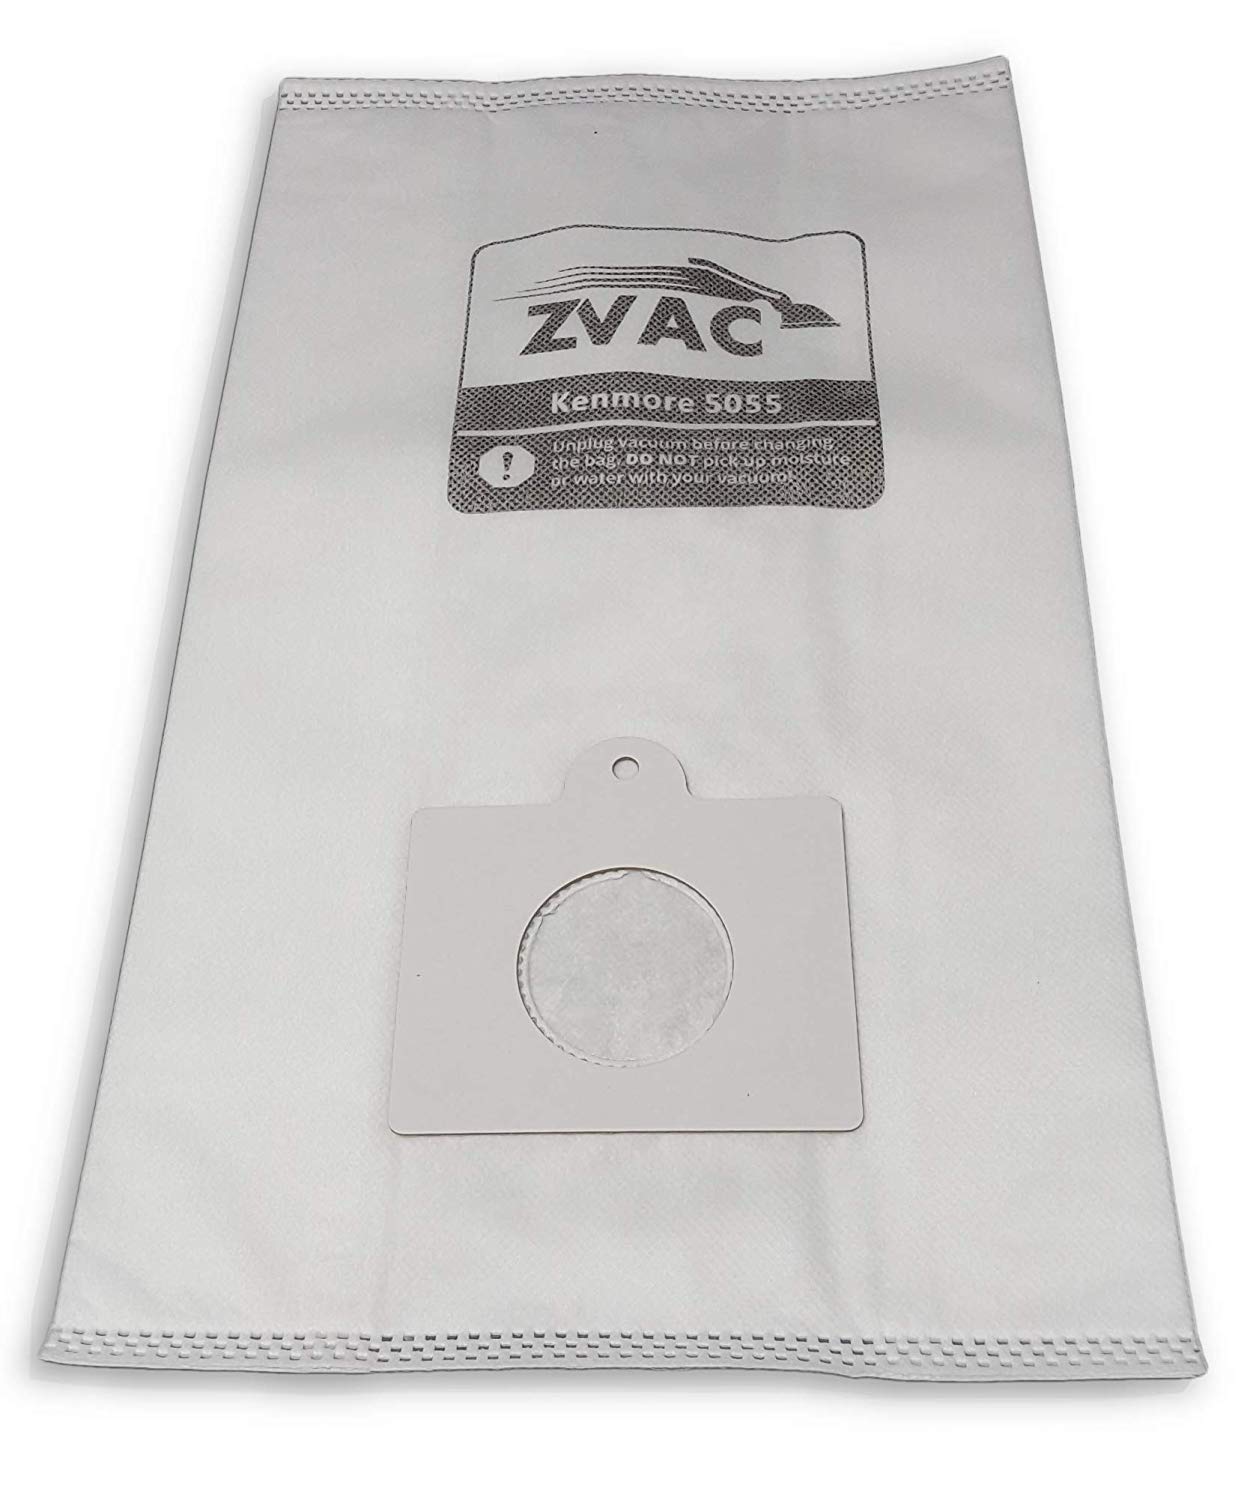 ZVac Replacement Kenmore Style C/Q Micro Filtration Canister Cloth Vacuum Bags Compatible Kenmore 5055, 50557 (Pack of 25)